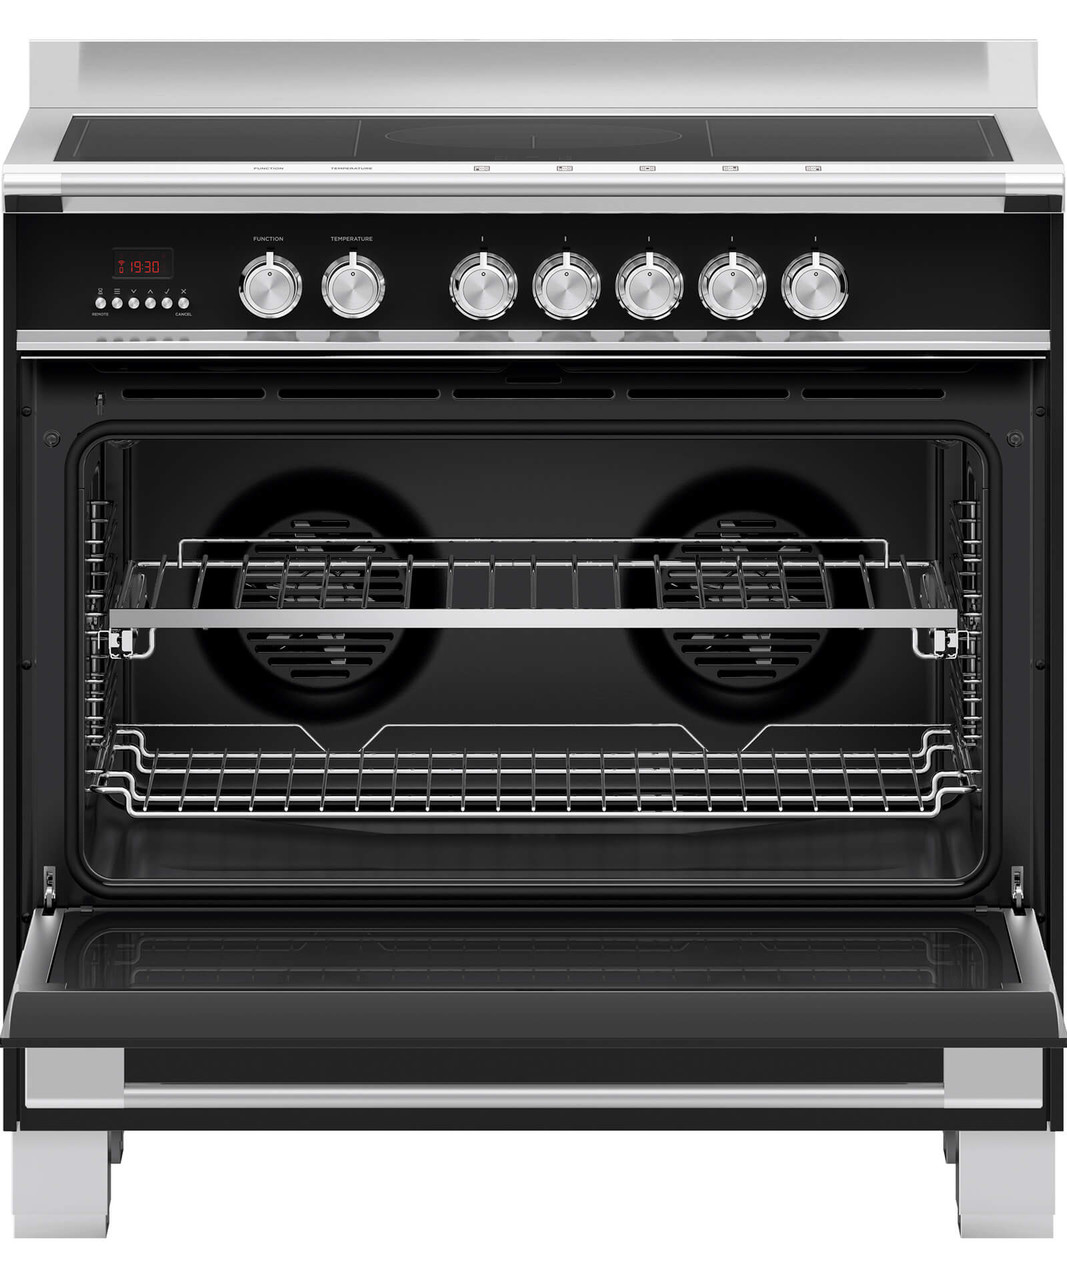 OR90SCI4B1 - 90cm Classic Style Freestanding Cooker, 5 Zone Induction - Black